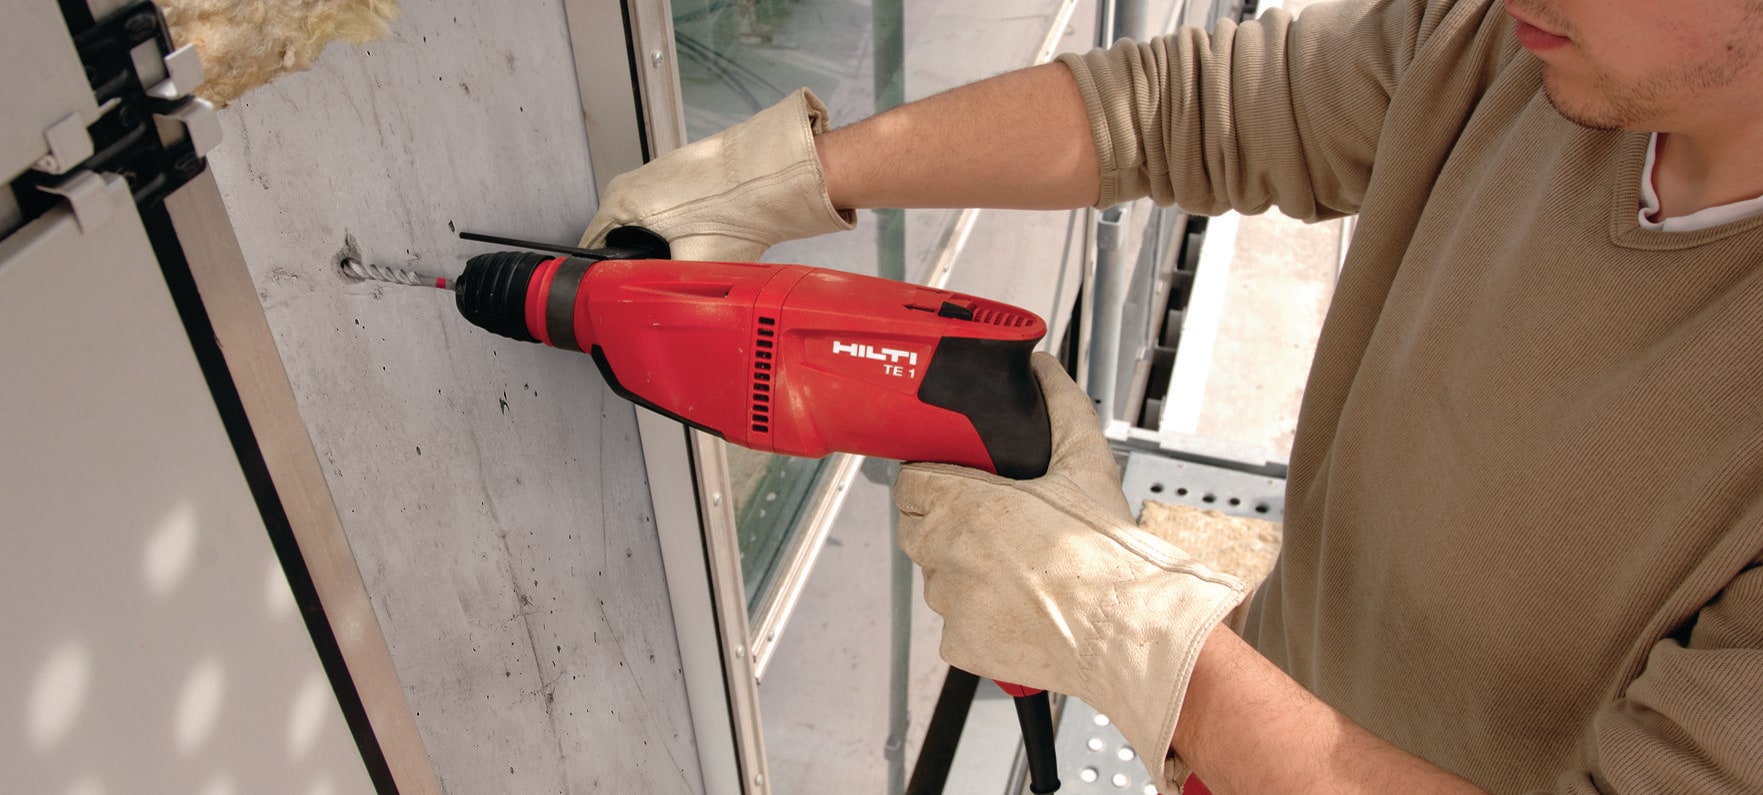 Hilti Te 1 TE1 Rotary Hammer Drill 250605 Tested Works Made in Liechtenstein for sale online 